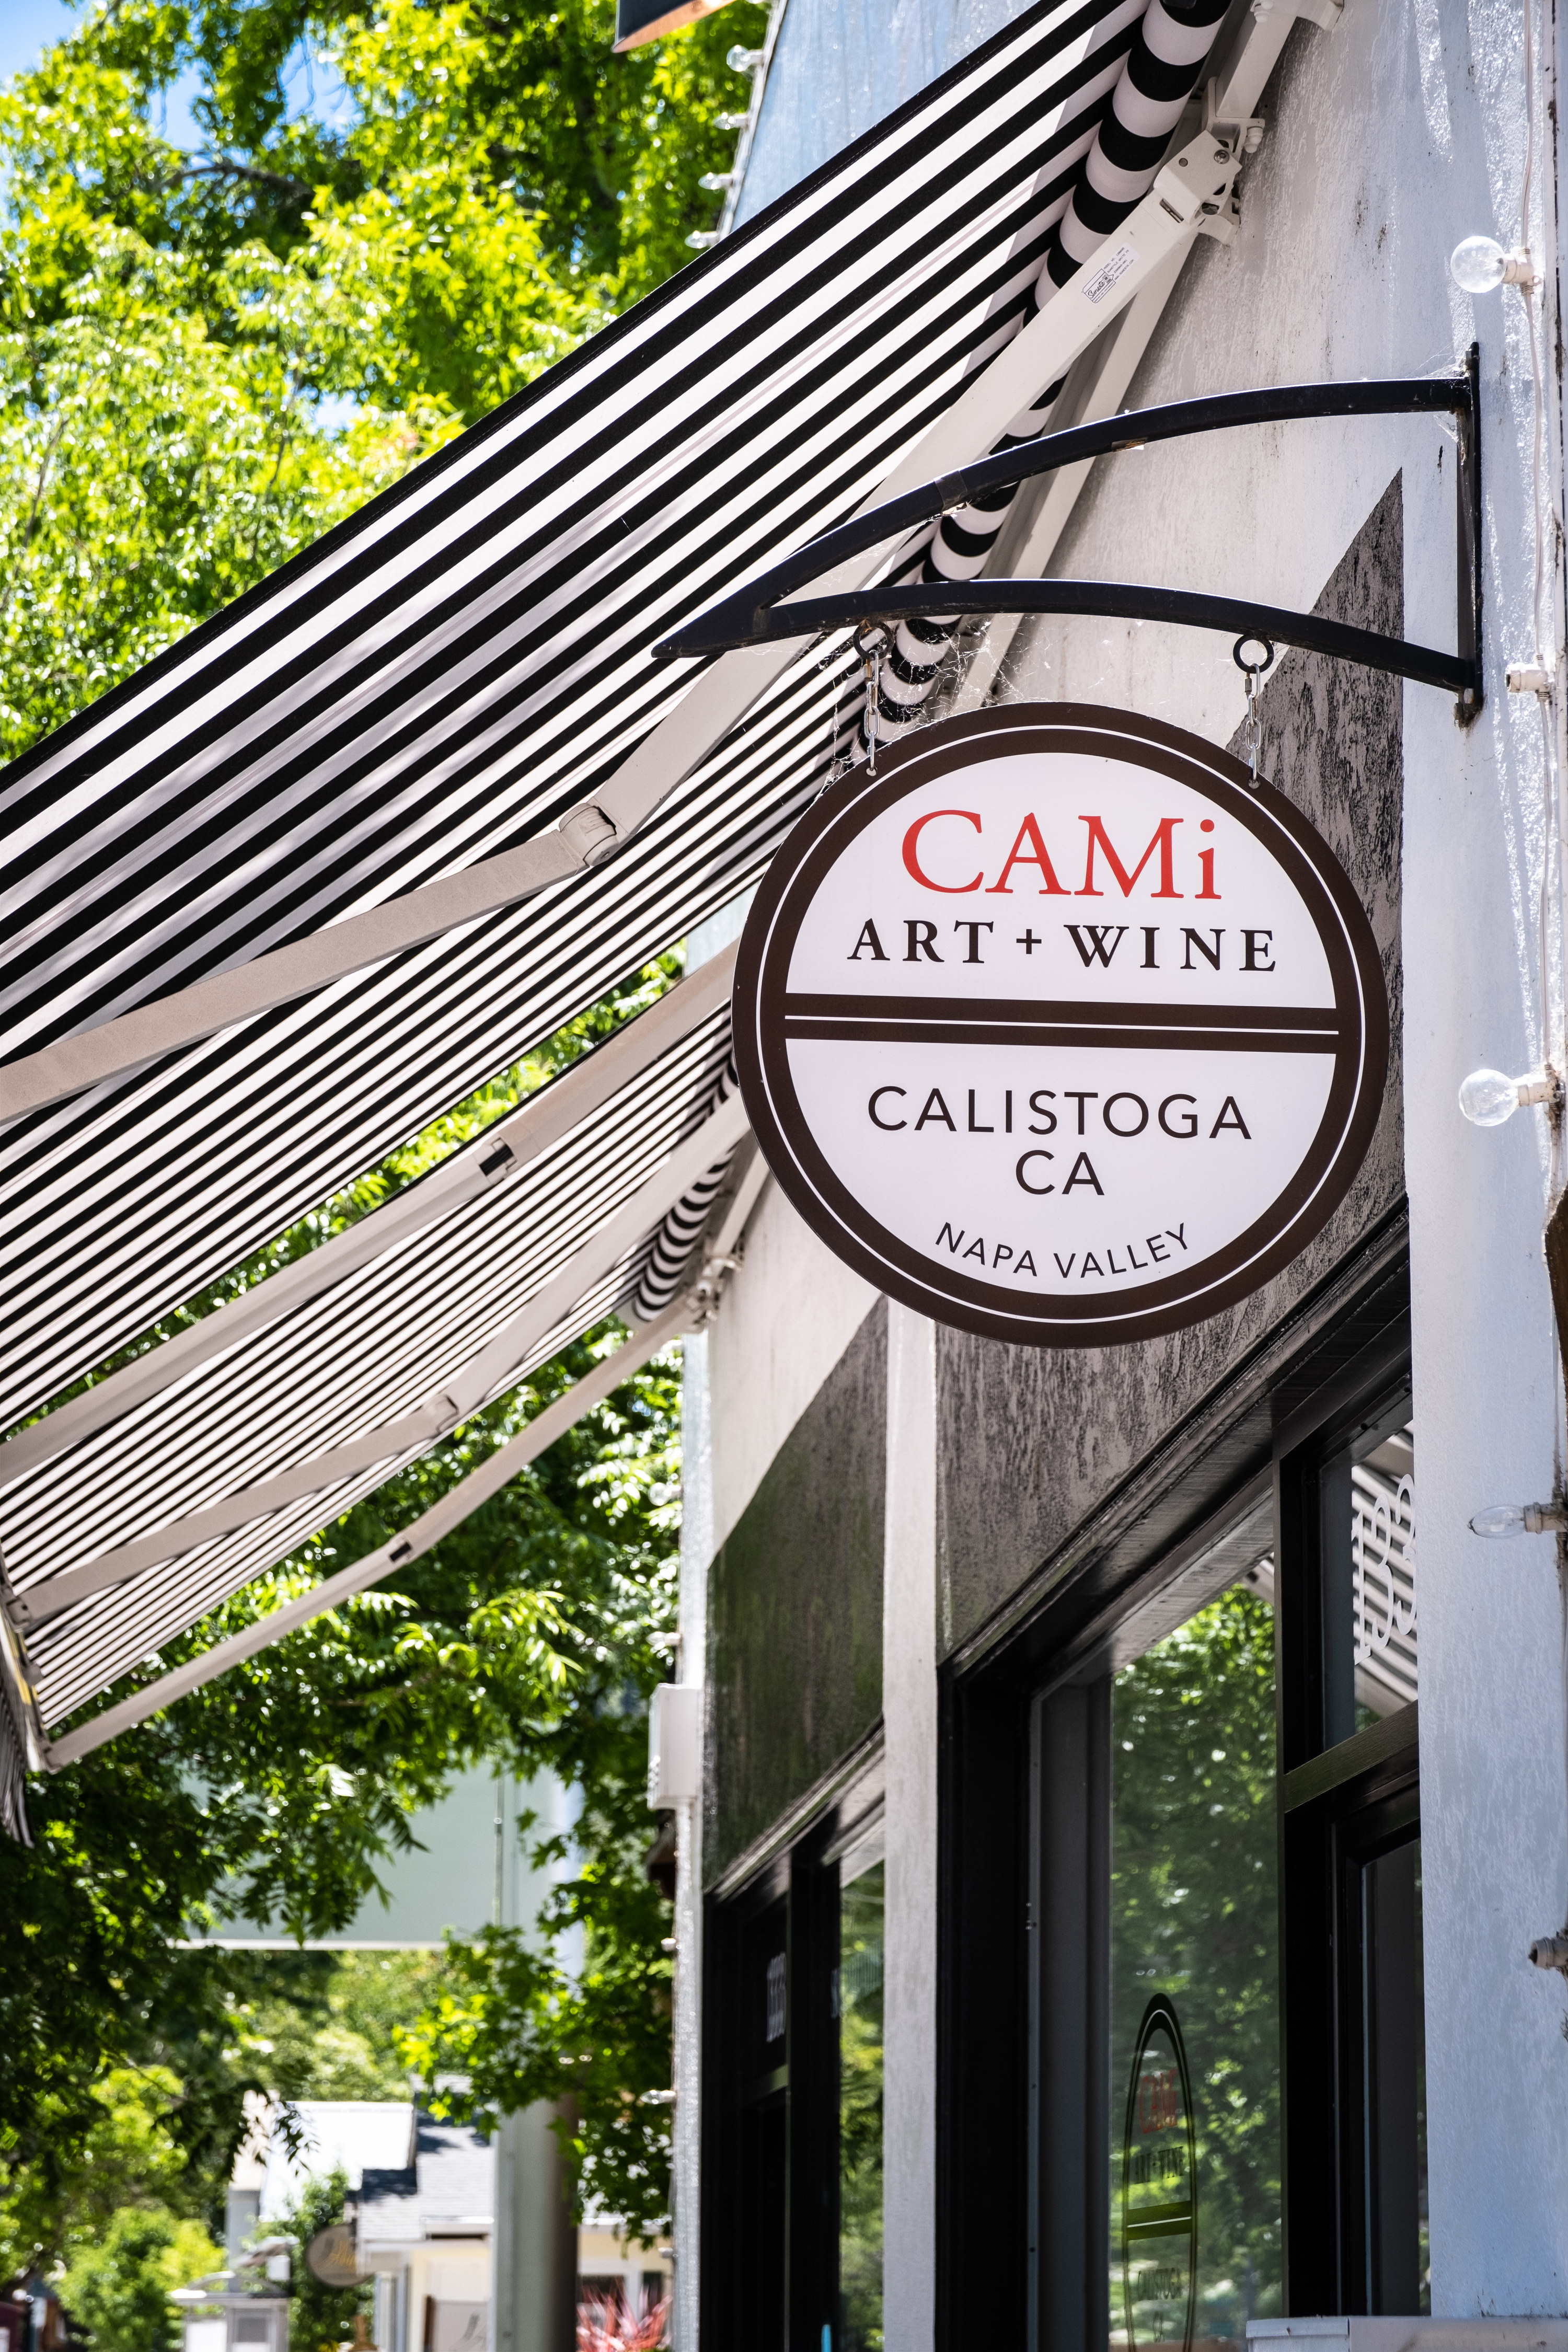 Shop with a sign that says &quot;Cami Art + Wine, Calistoga California&quot;